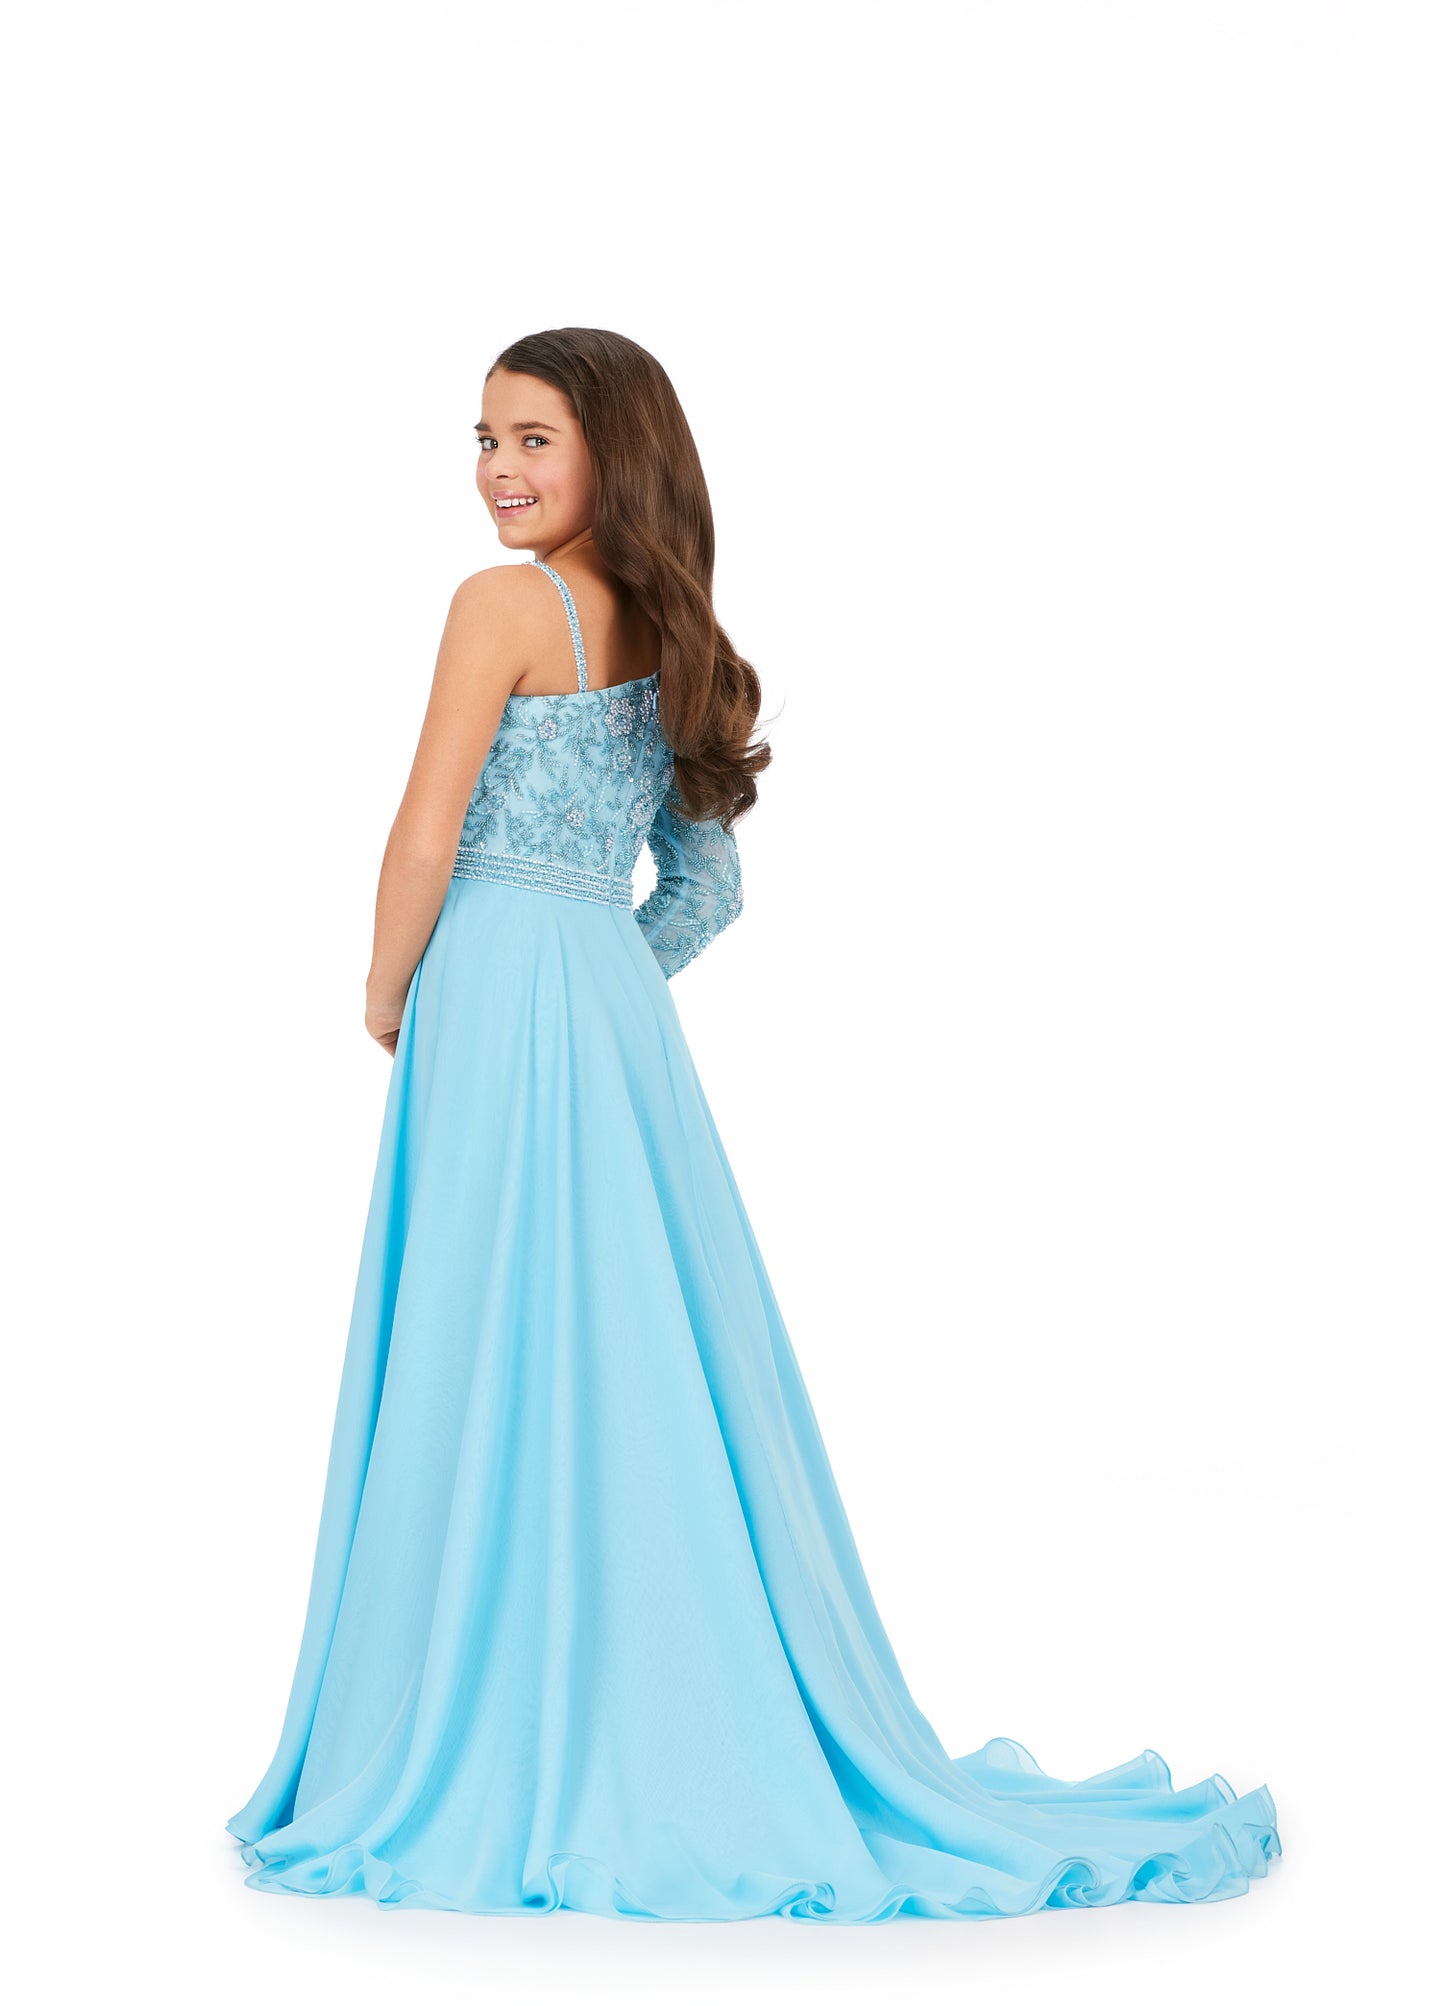 Ashley Lauren Kids 8197 One Shoulder Fully Beaded Bodice A-Line Chiffon Skirt Gown. Make all your dreams come true in this stunning one shoulder gown. With gorgeous beaded details throughout the top and a chiffon skirt, this dress is sure to WOW the crowd!